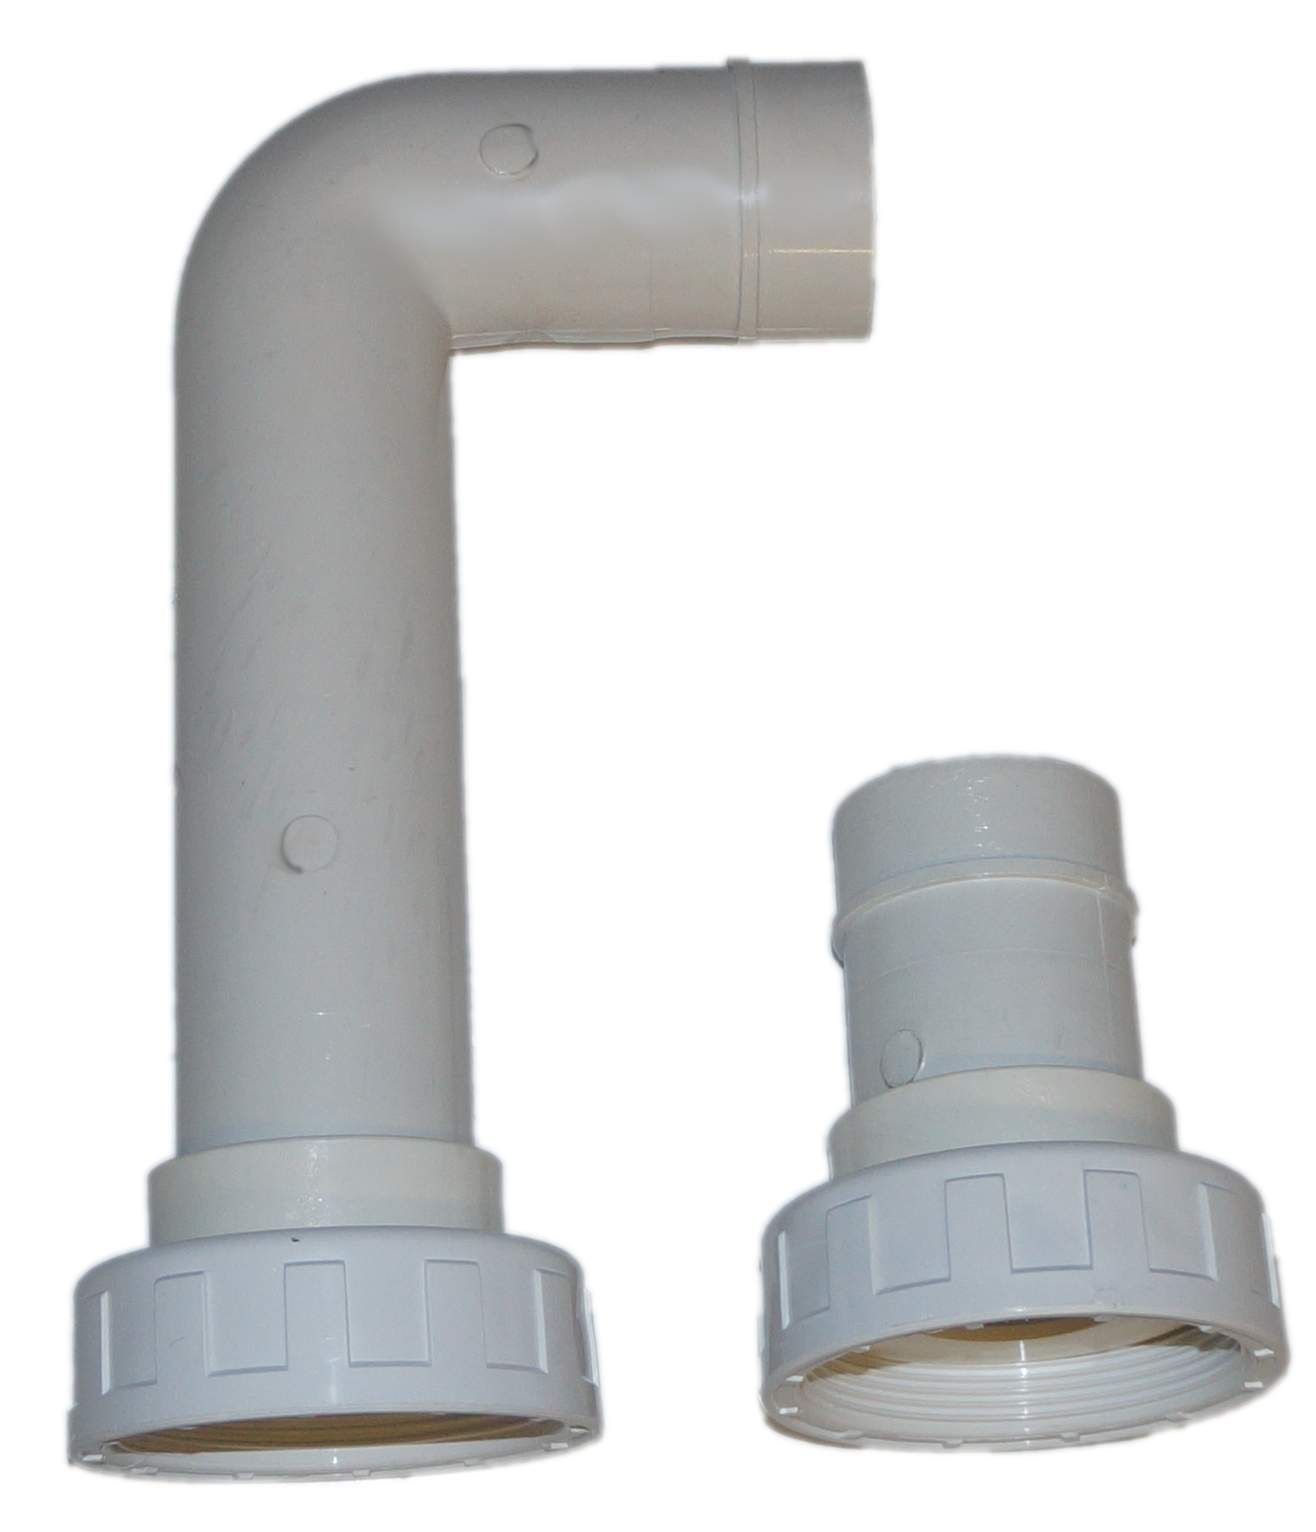 Connection kit for 2" globe valve for LPSM20320C